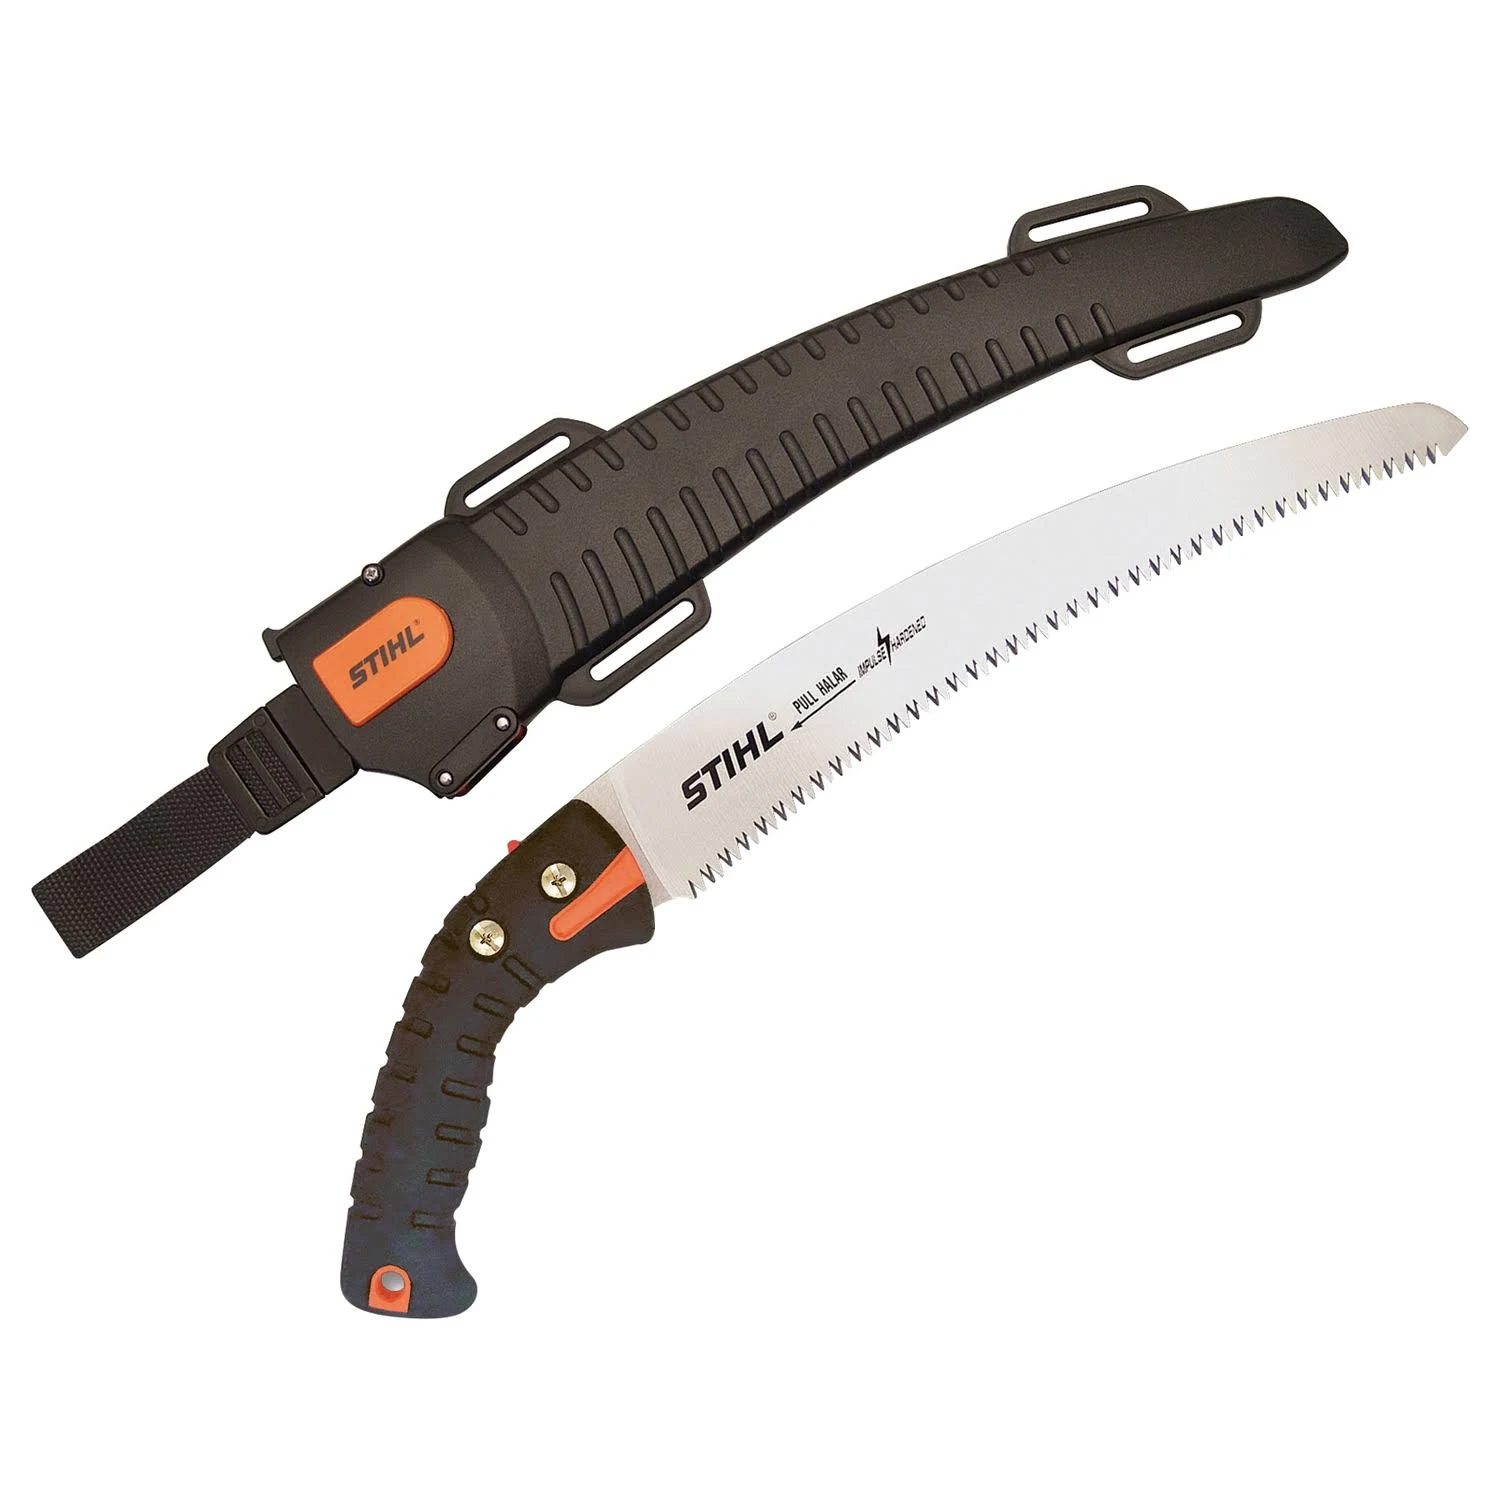 Stihl PS 90 Arboriculture Fixed Blade Pruning Saw | 7010 882 0903